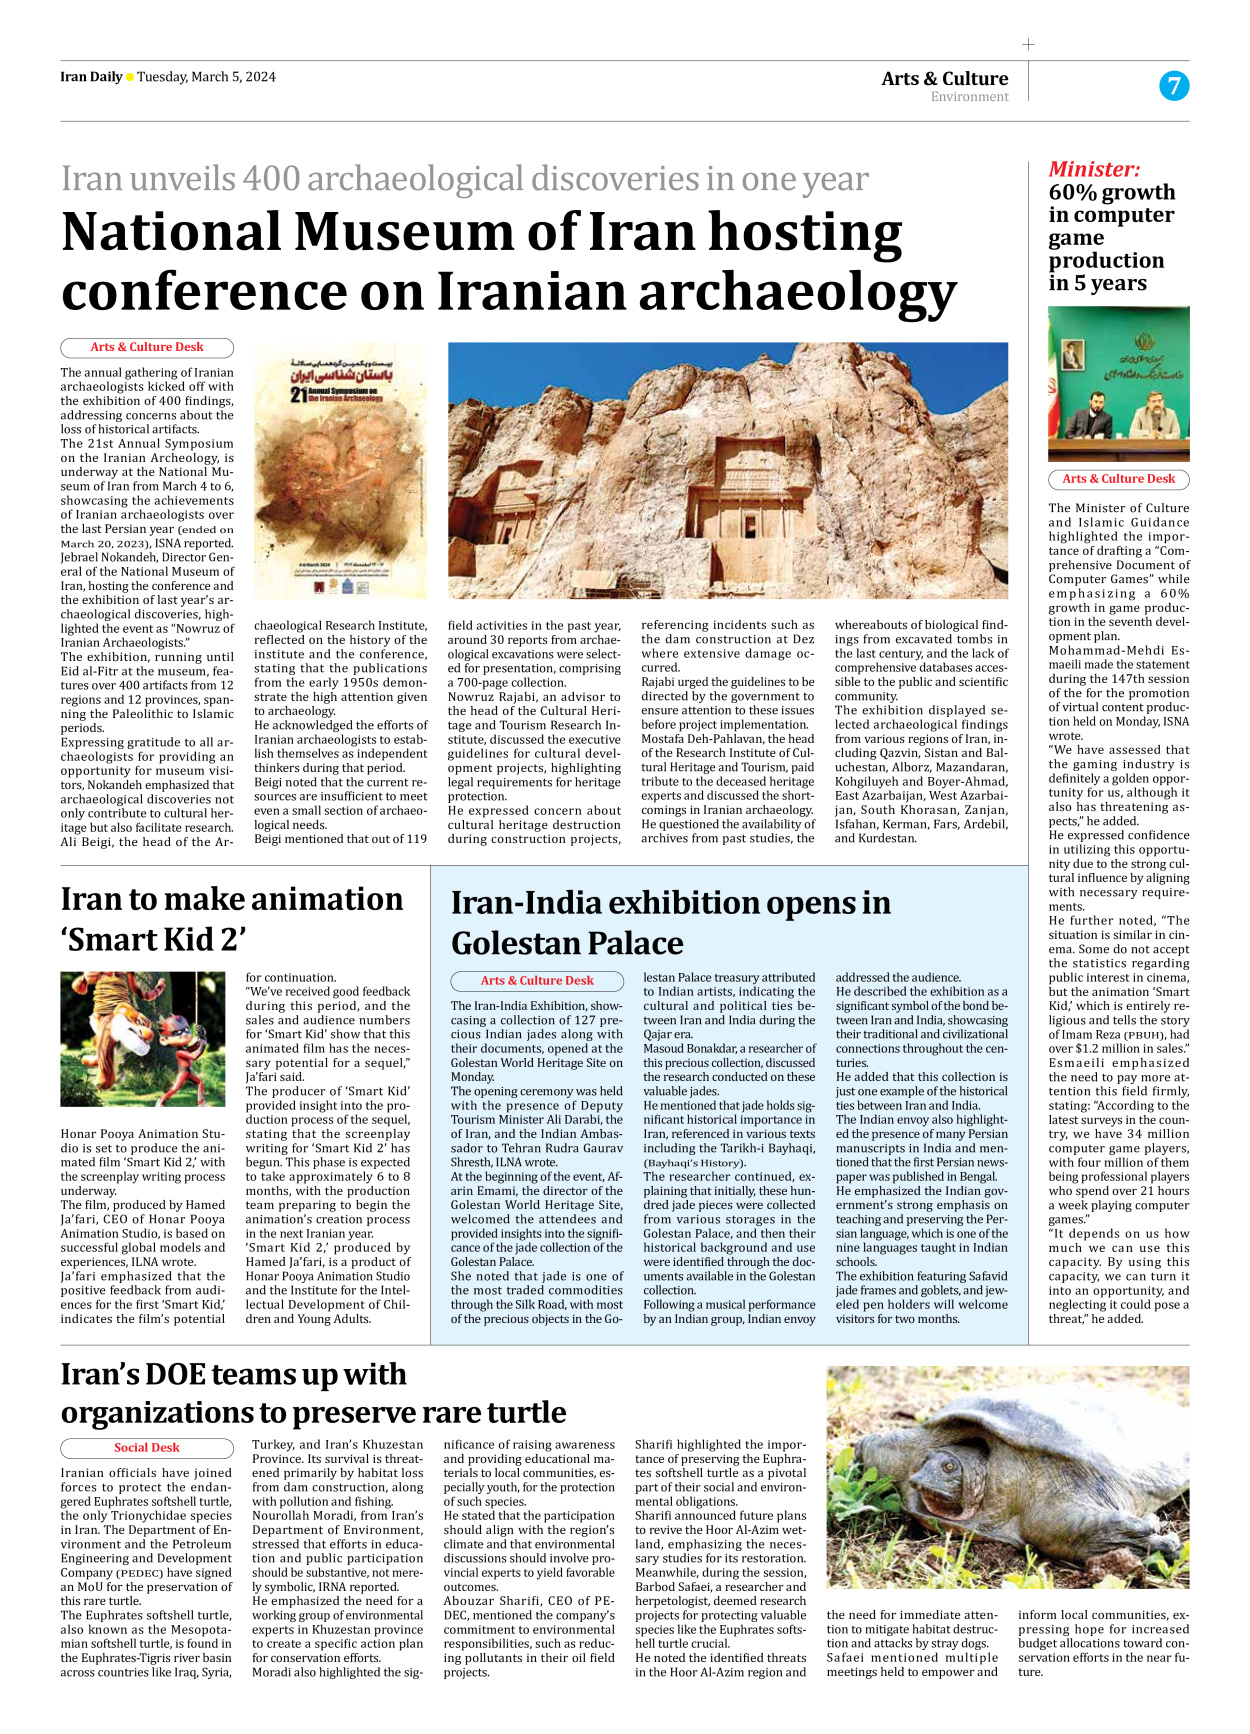 Iran Daily - Number Seven Thousand Five Hundred and Twenty Two - 05 March 2024 - Page 7